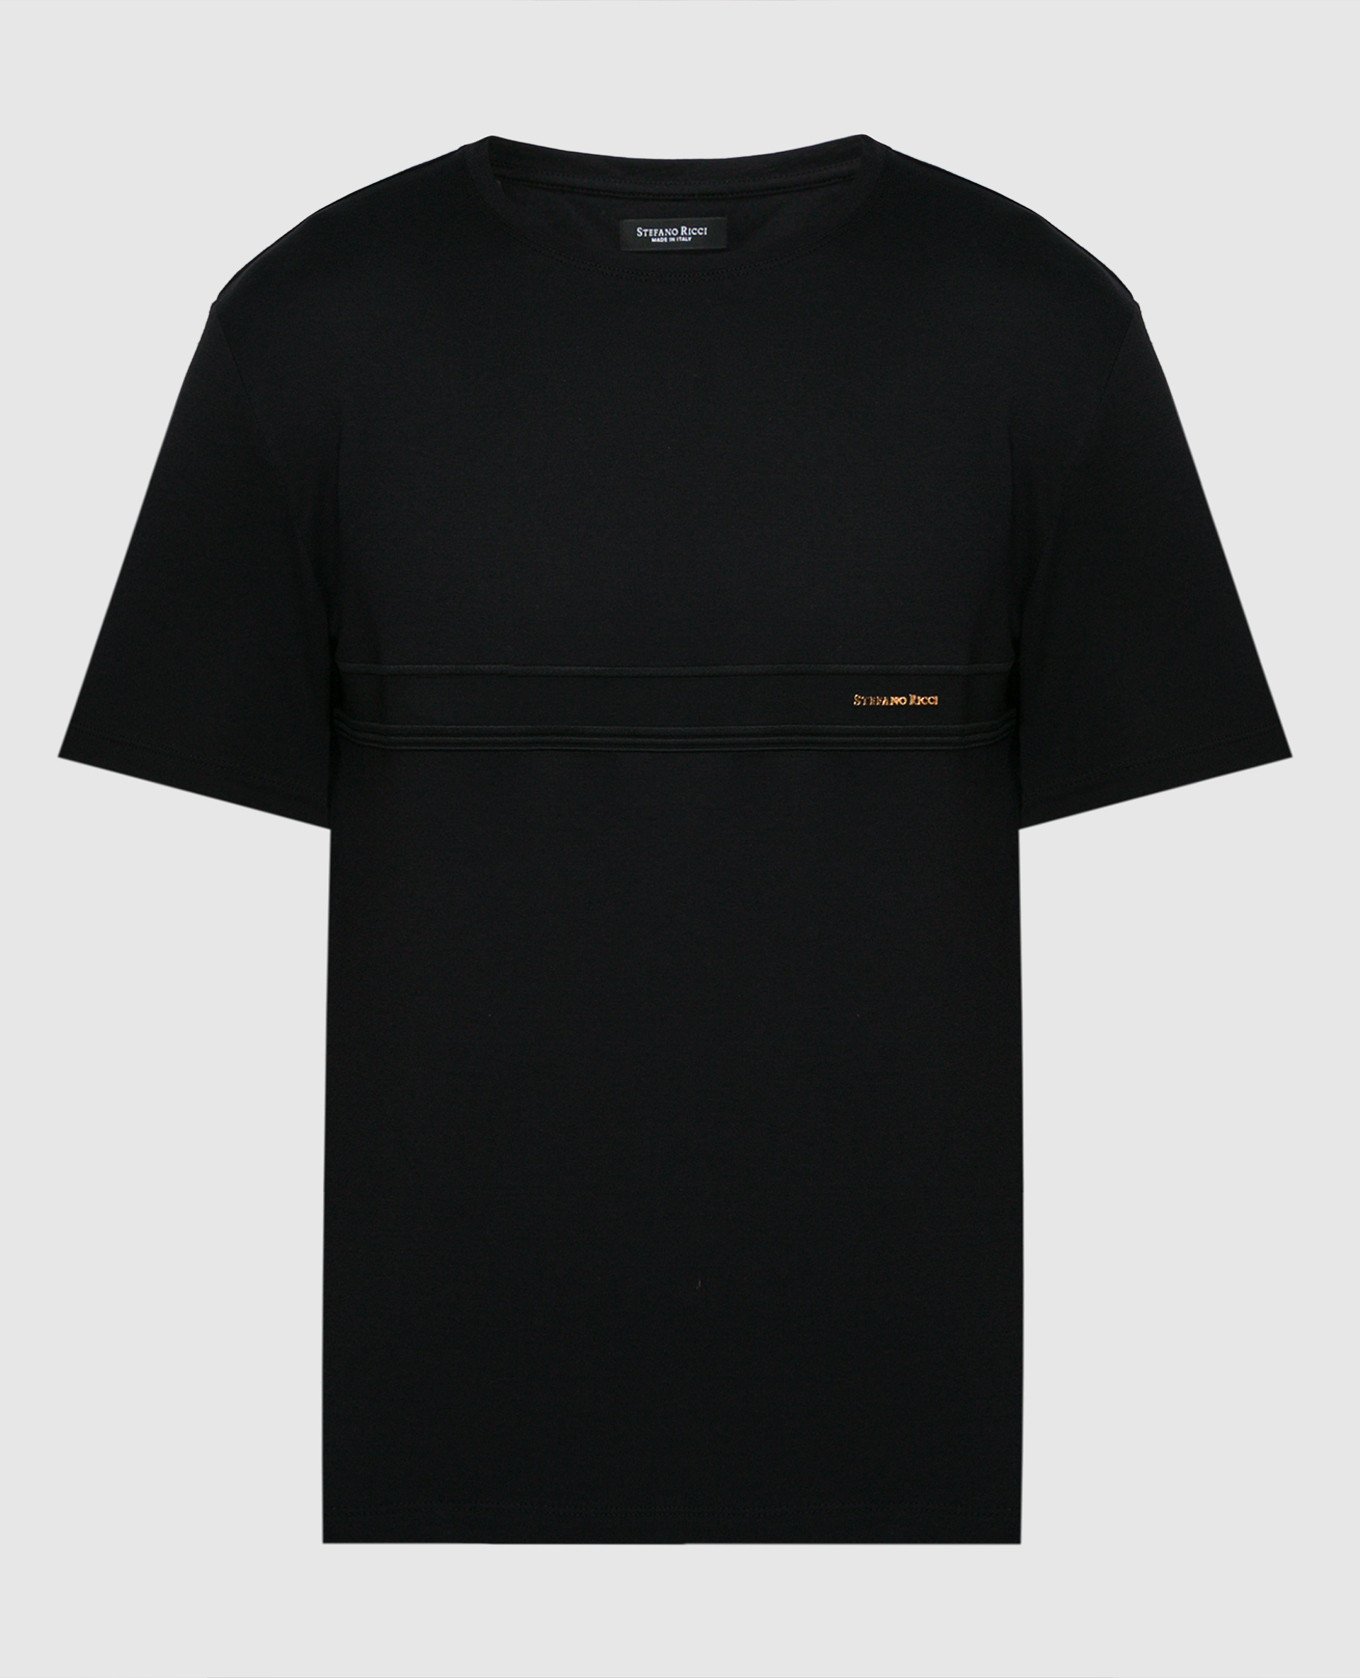 Black t-shirt with embroidery and logo